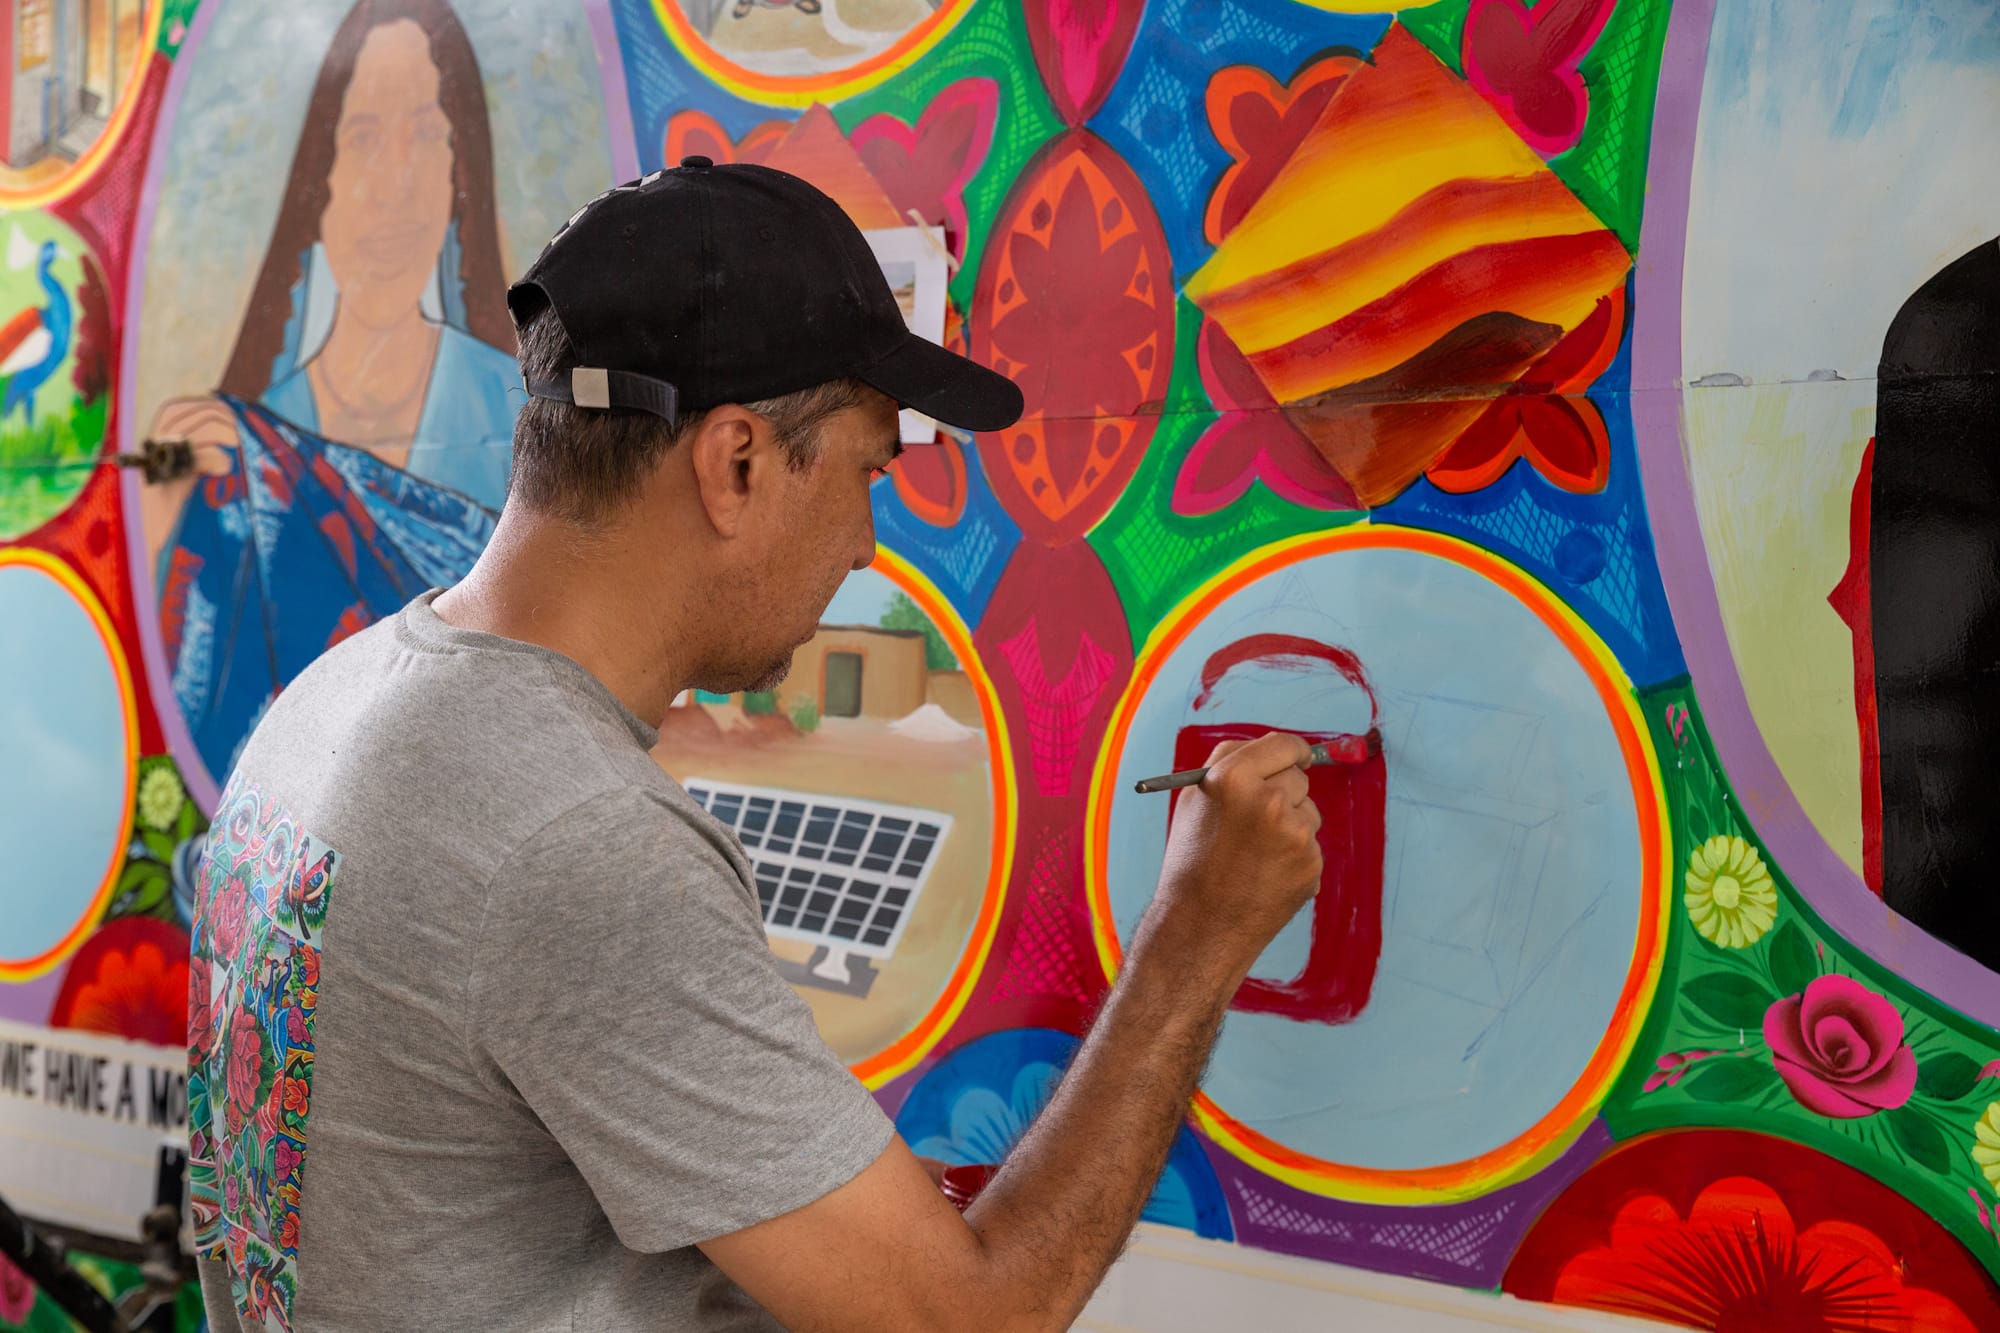 Man painting a picture within a wider brightly coloured composition on the side of a truck.